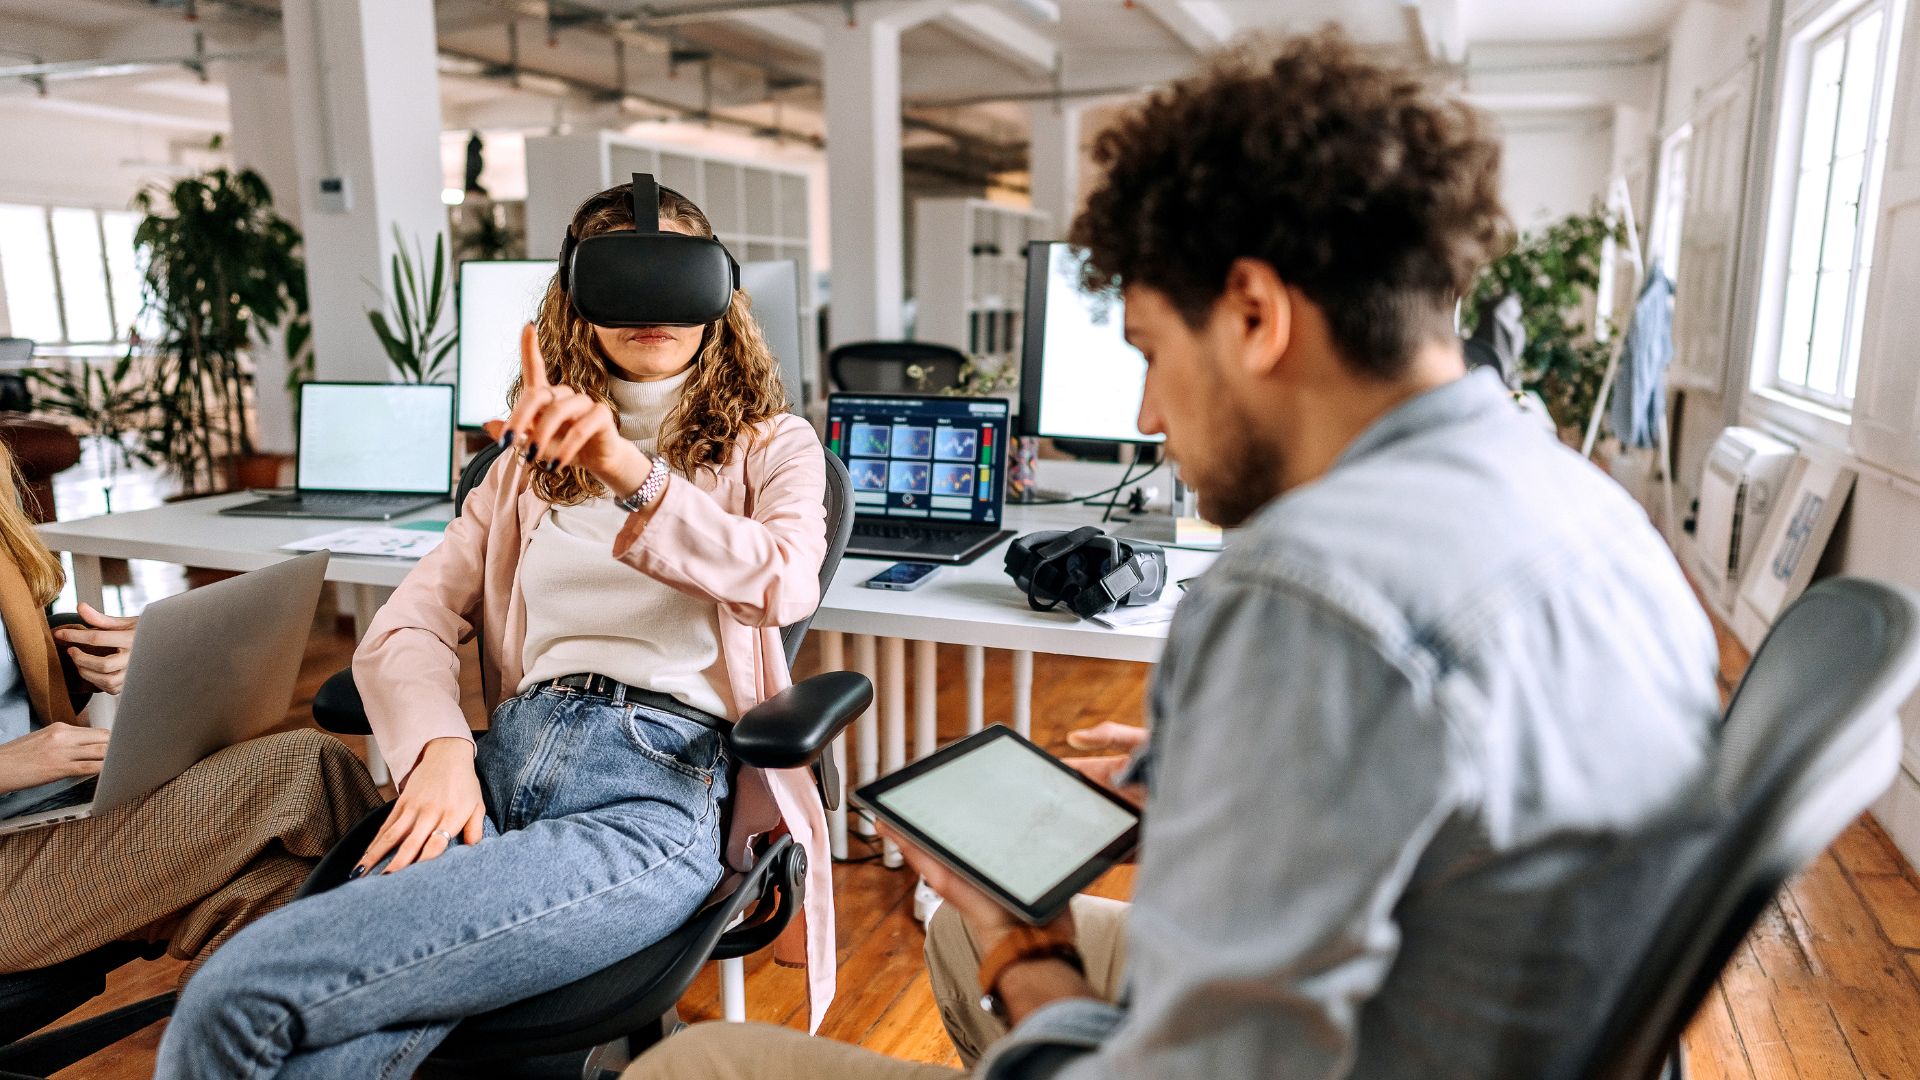 A futuristic depiction of virtual reality in a business setting